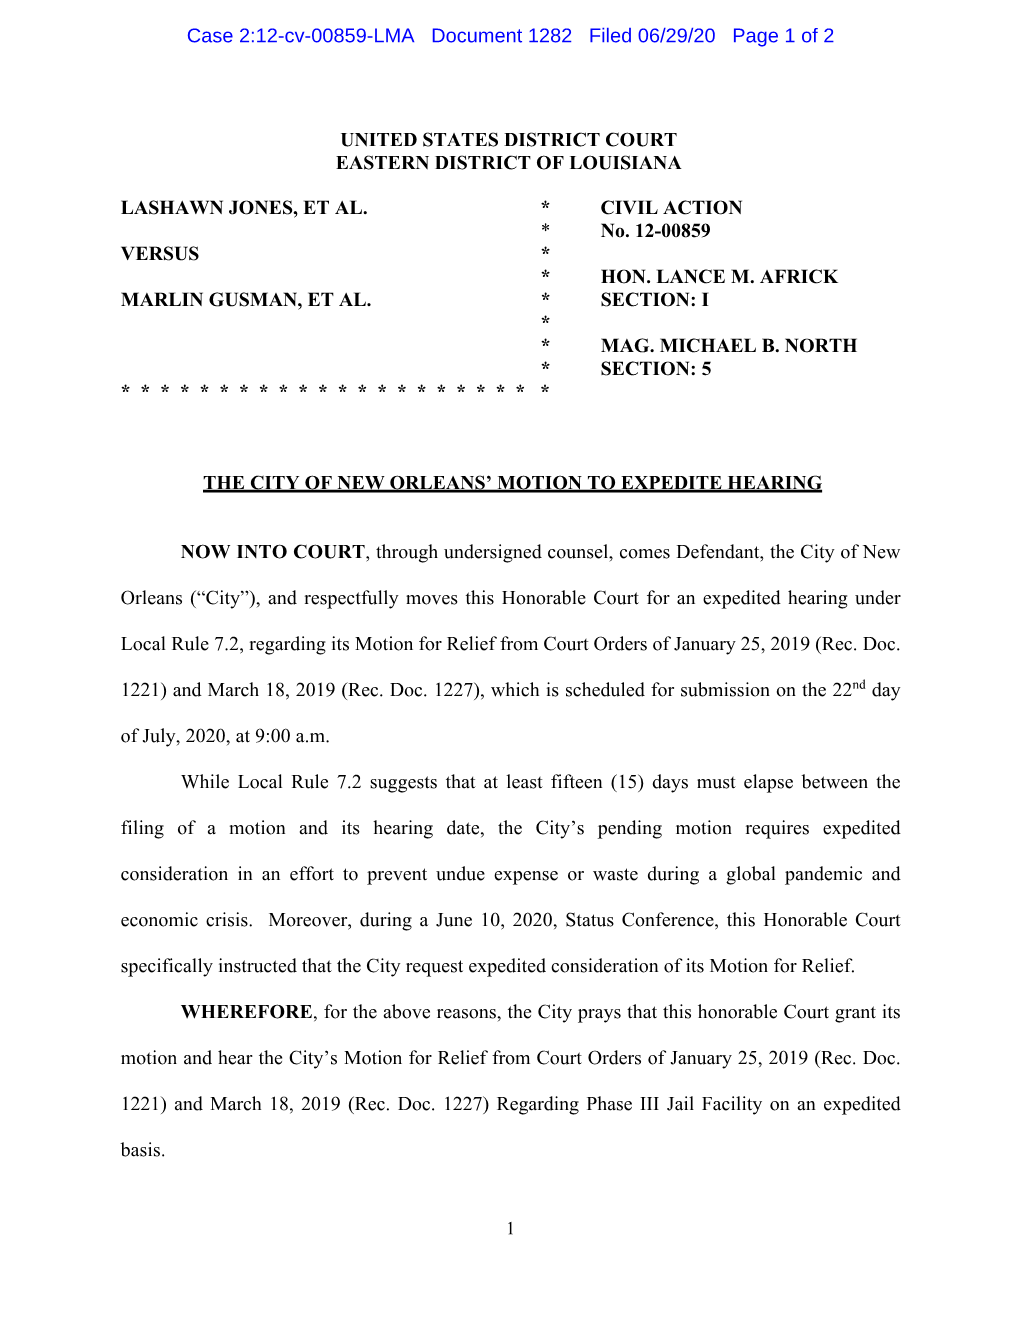 READ: City of New Orleans Motion for Expedited Hearing Here